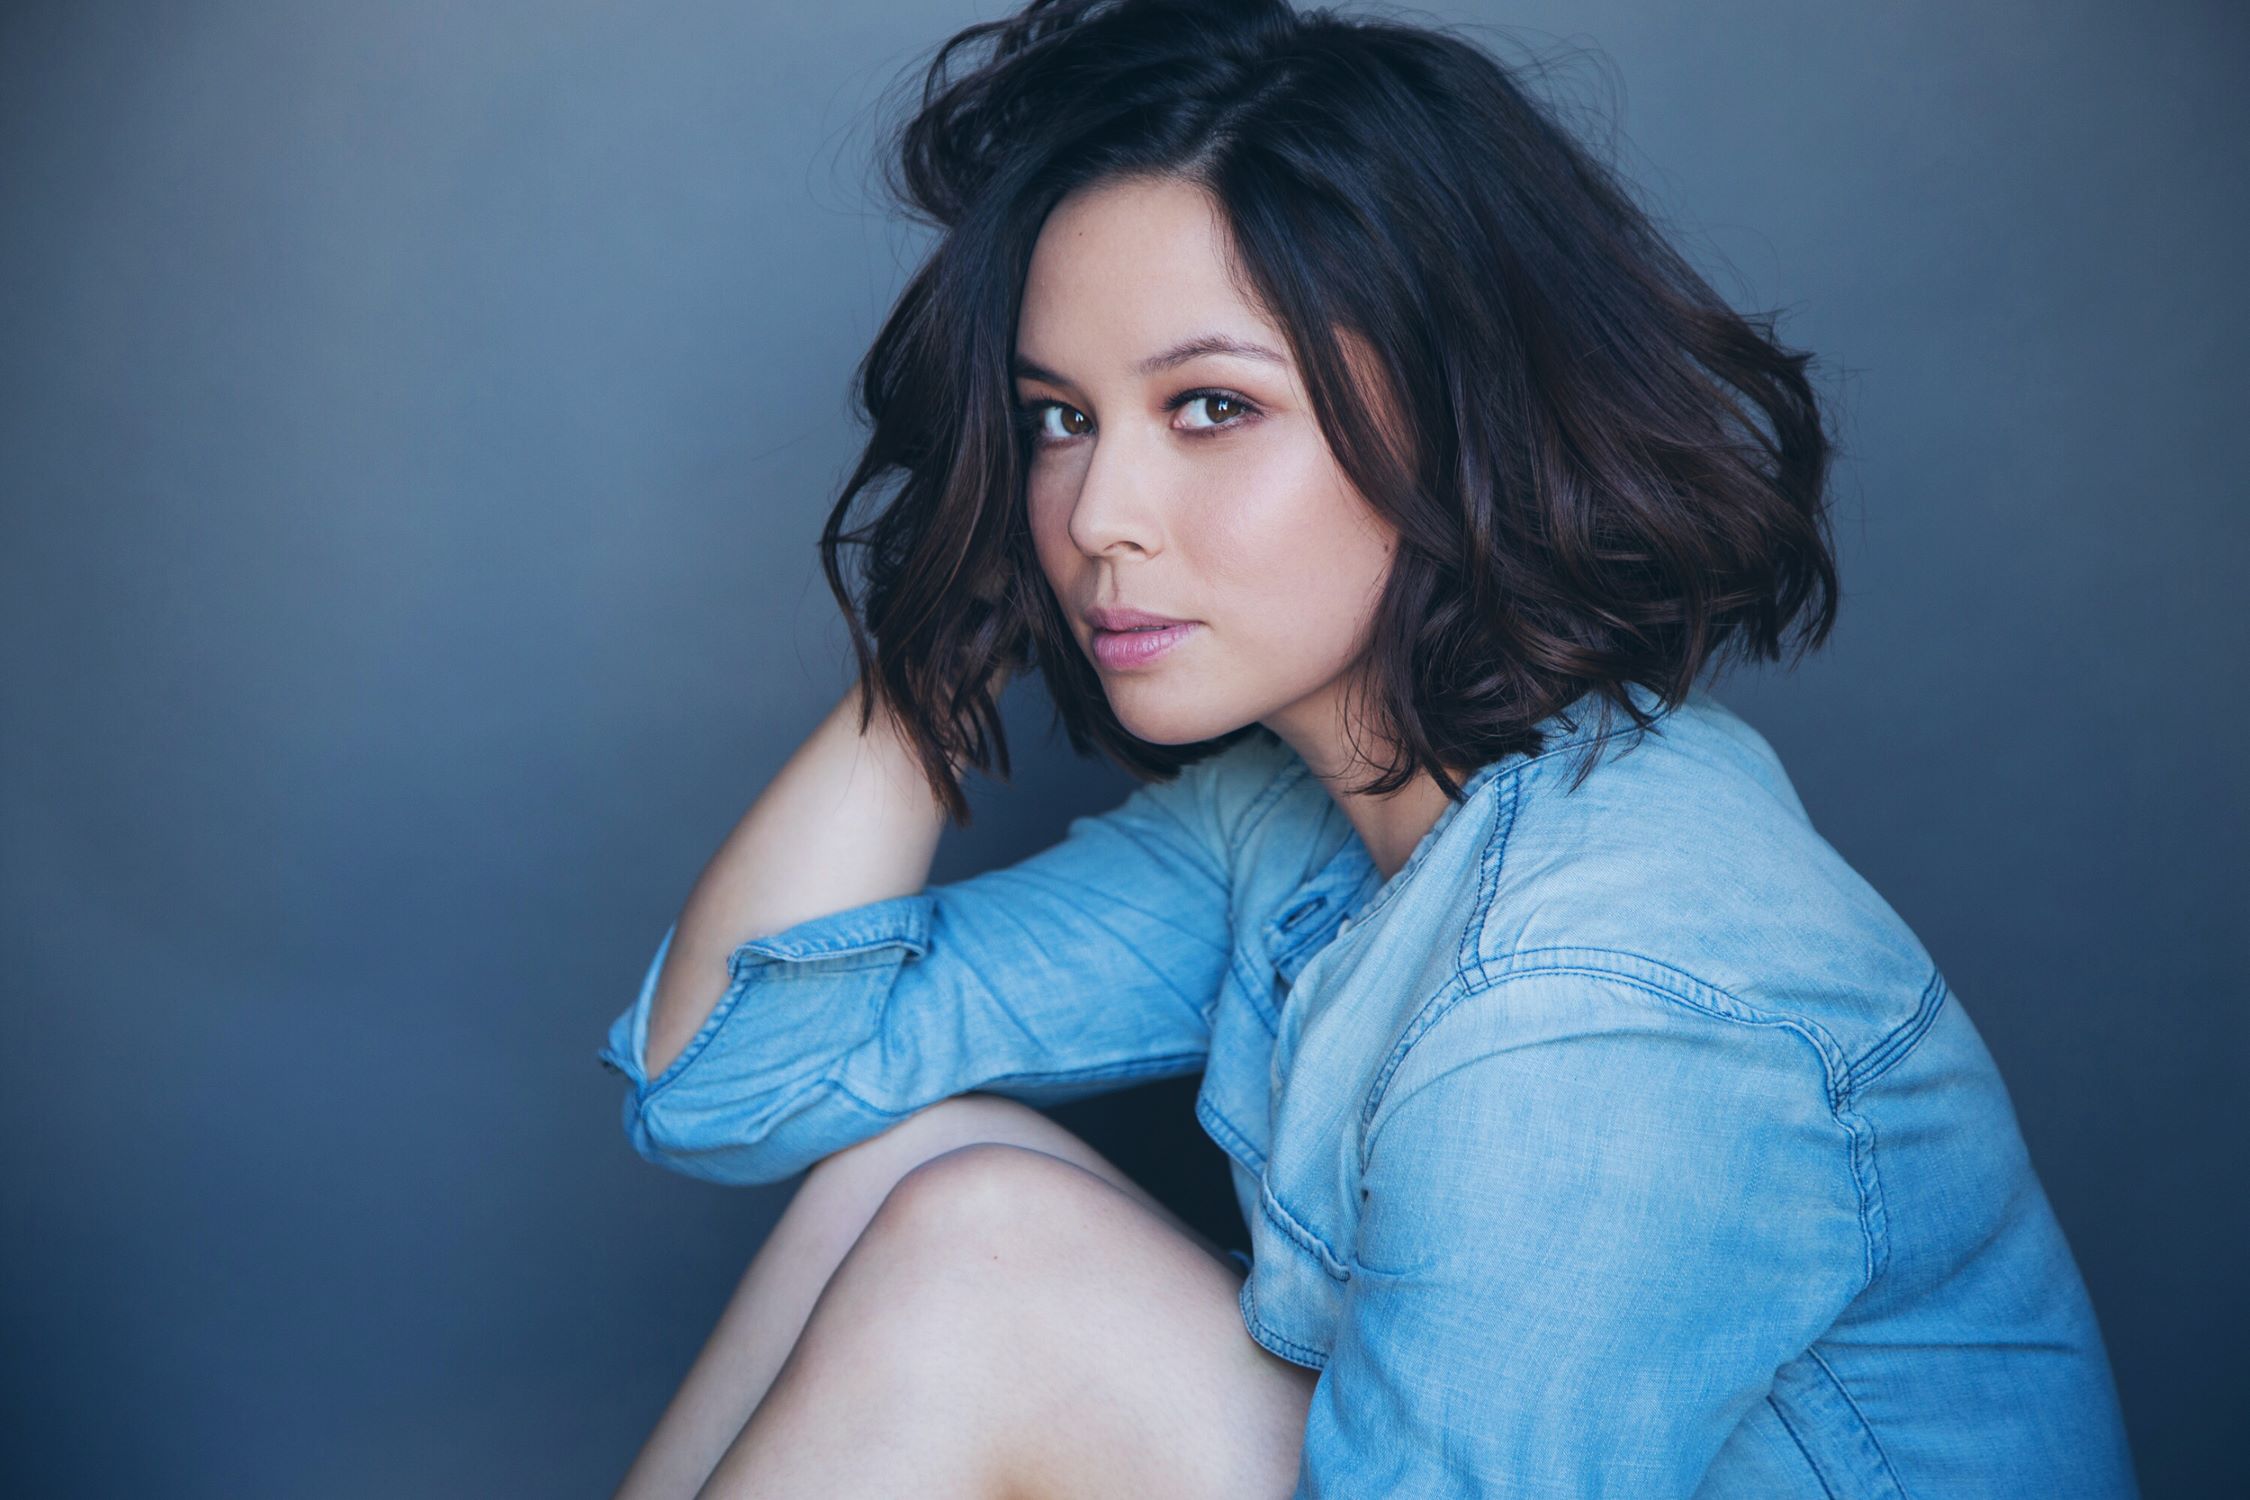 Malese Jow: From “Unfabulous” To Stardom